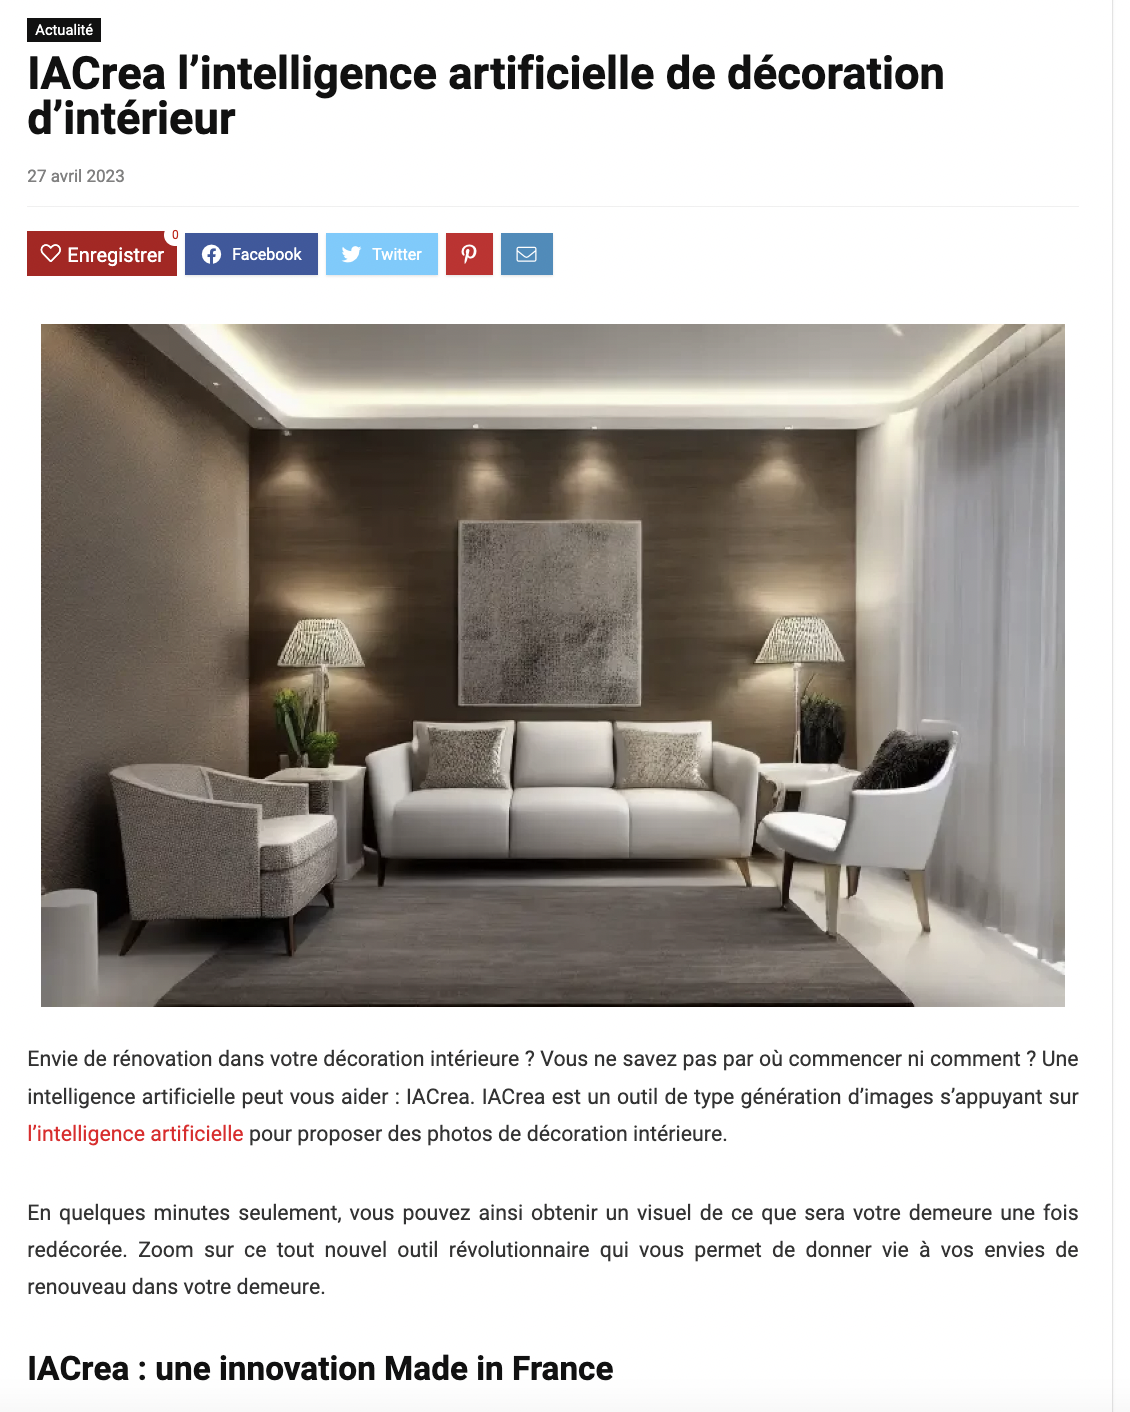 Article by Envie d'Entreprendre: the Made in France artificial intelligence for interior decoration